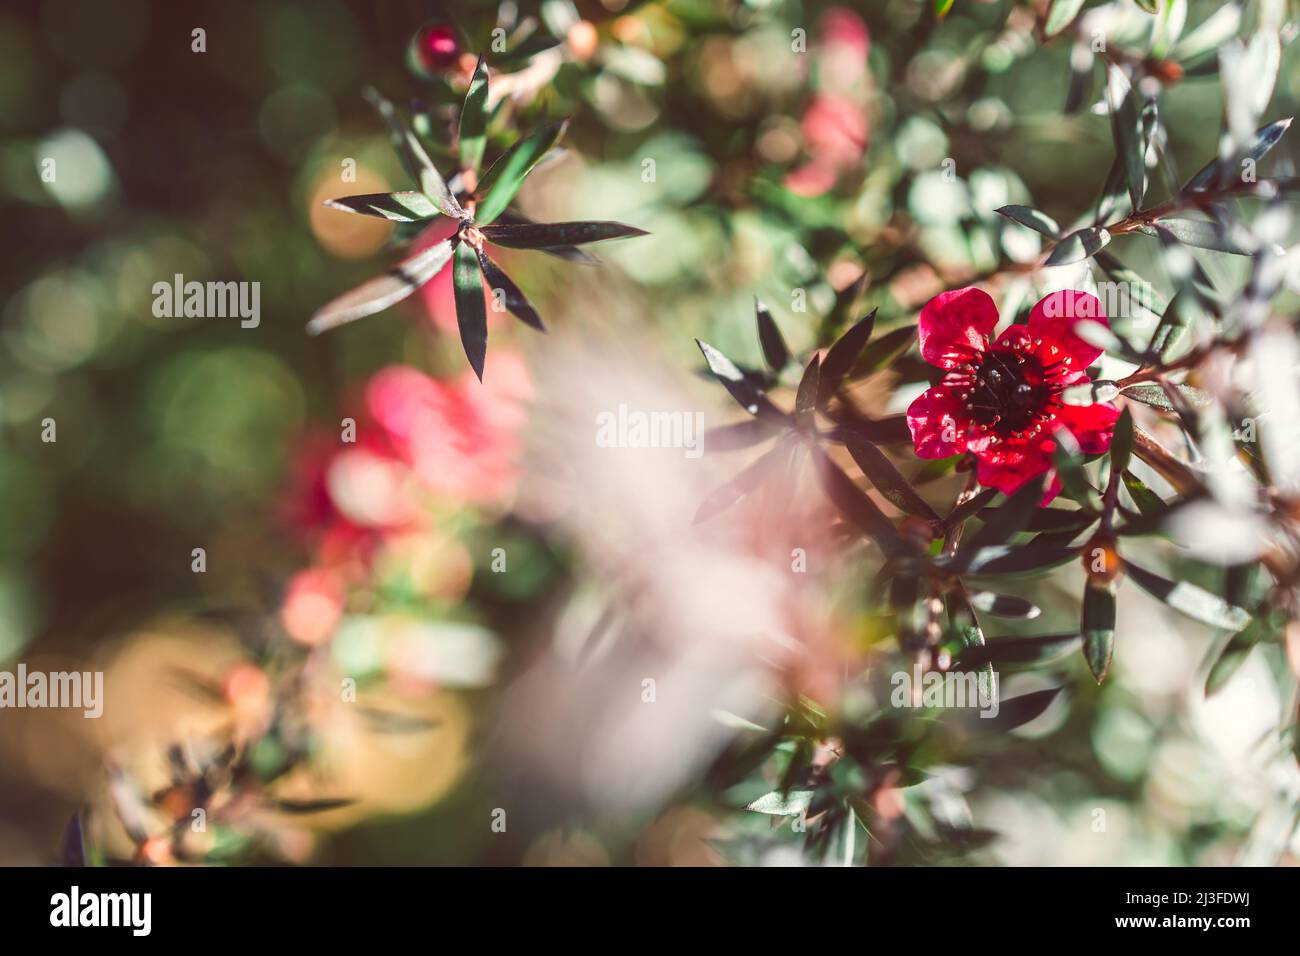 close-up New Zealand Tea Bush plant with dark leaves and red flowers shot at extremely shallow depth of field Stock Photo